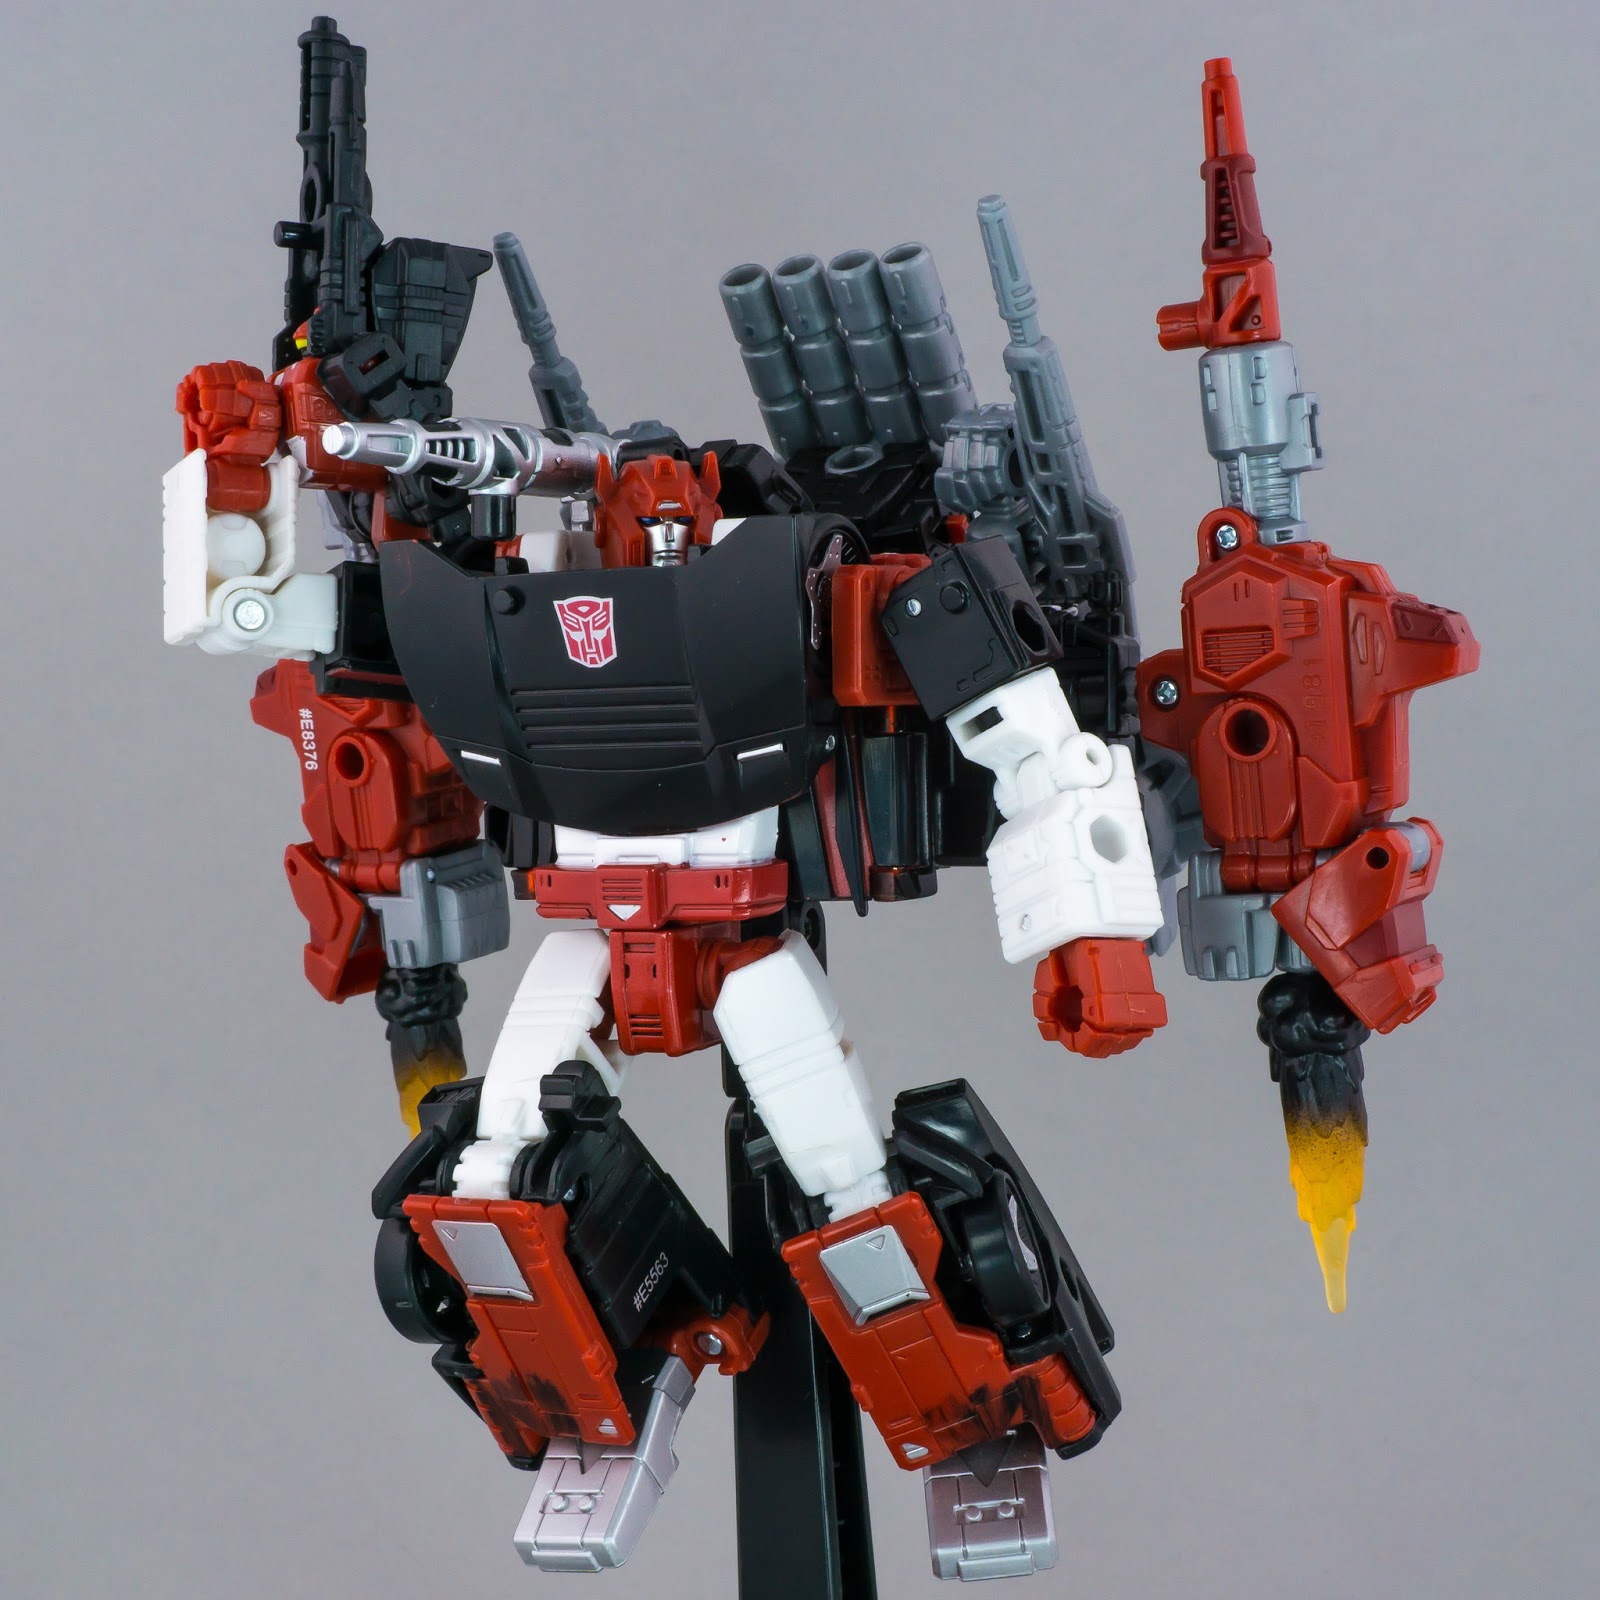 Transformers Generations Selects Cromar flight mission weaponizer mode